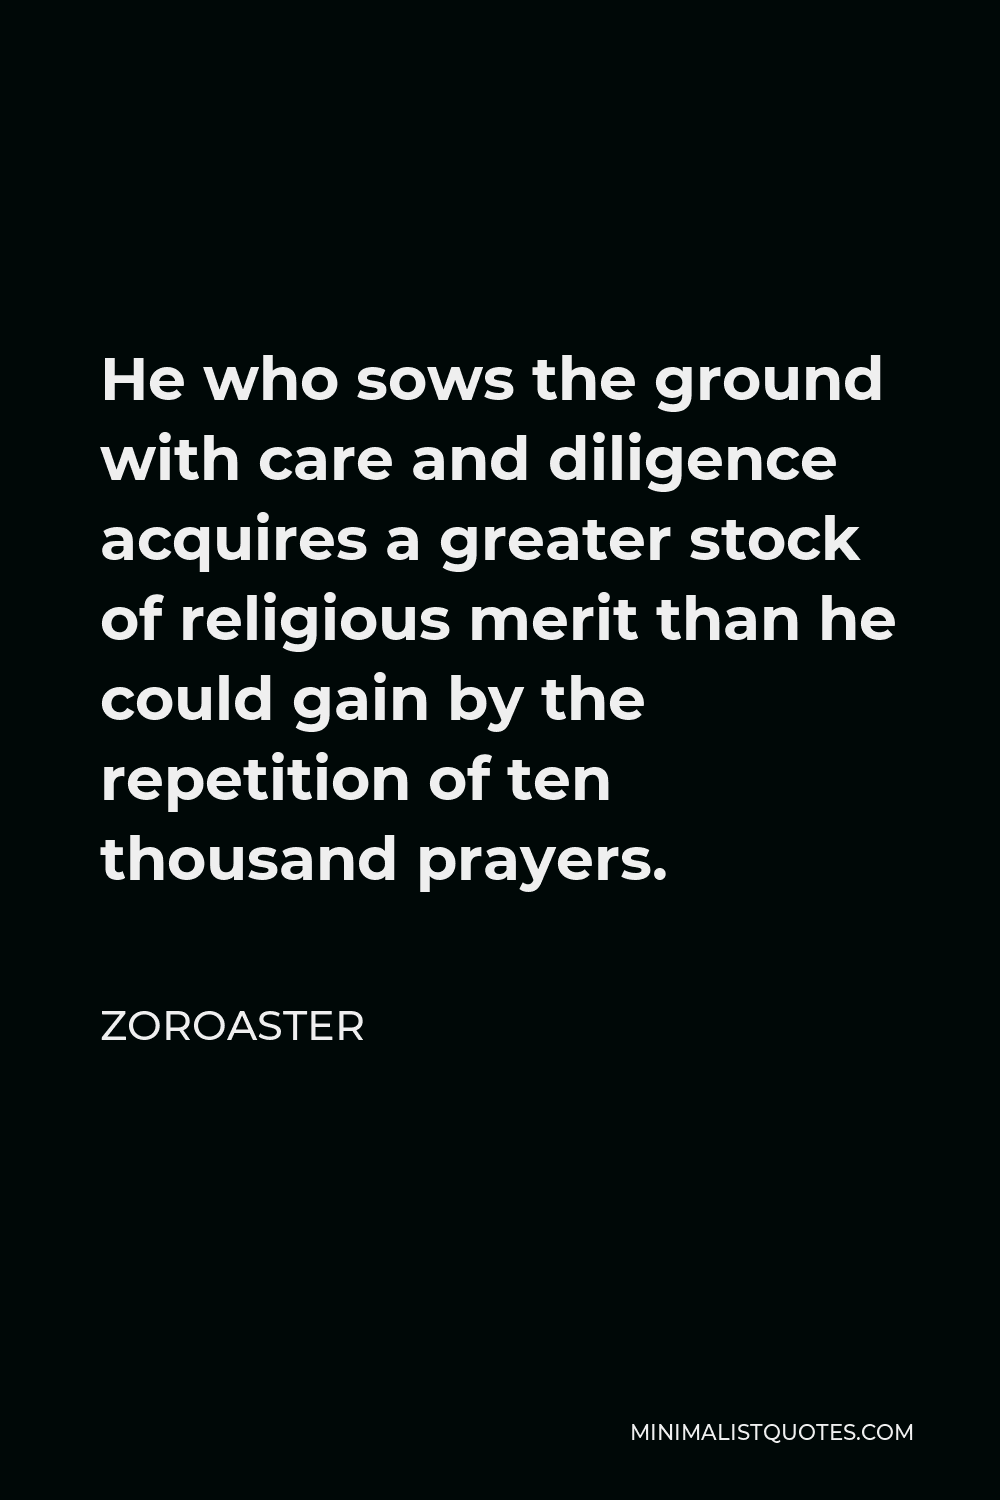 Zoroaster Quote - He who sows the ground with care and diligence acquires a greater stock of religious merit than he could gain by the repetition of ten thousand prayers.